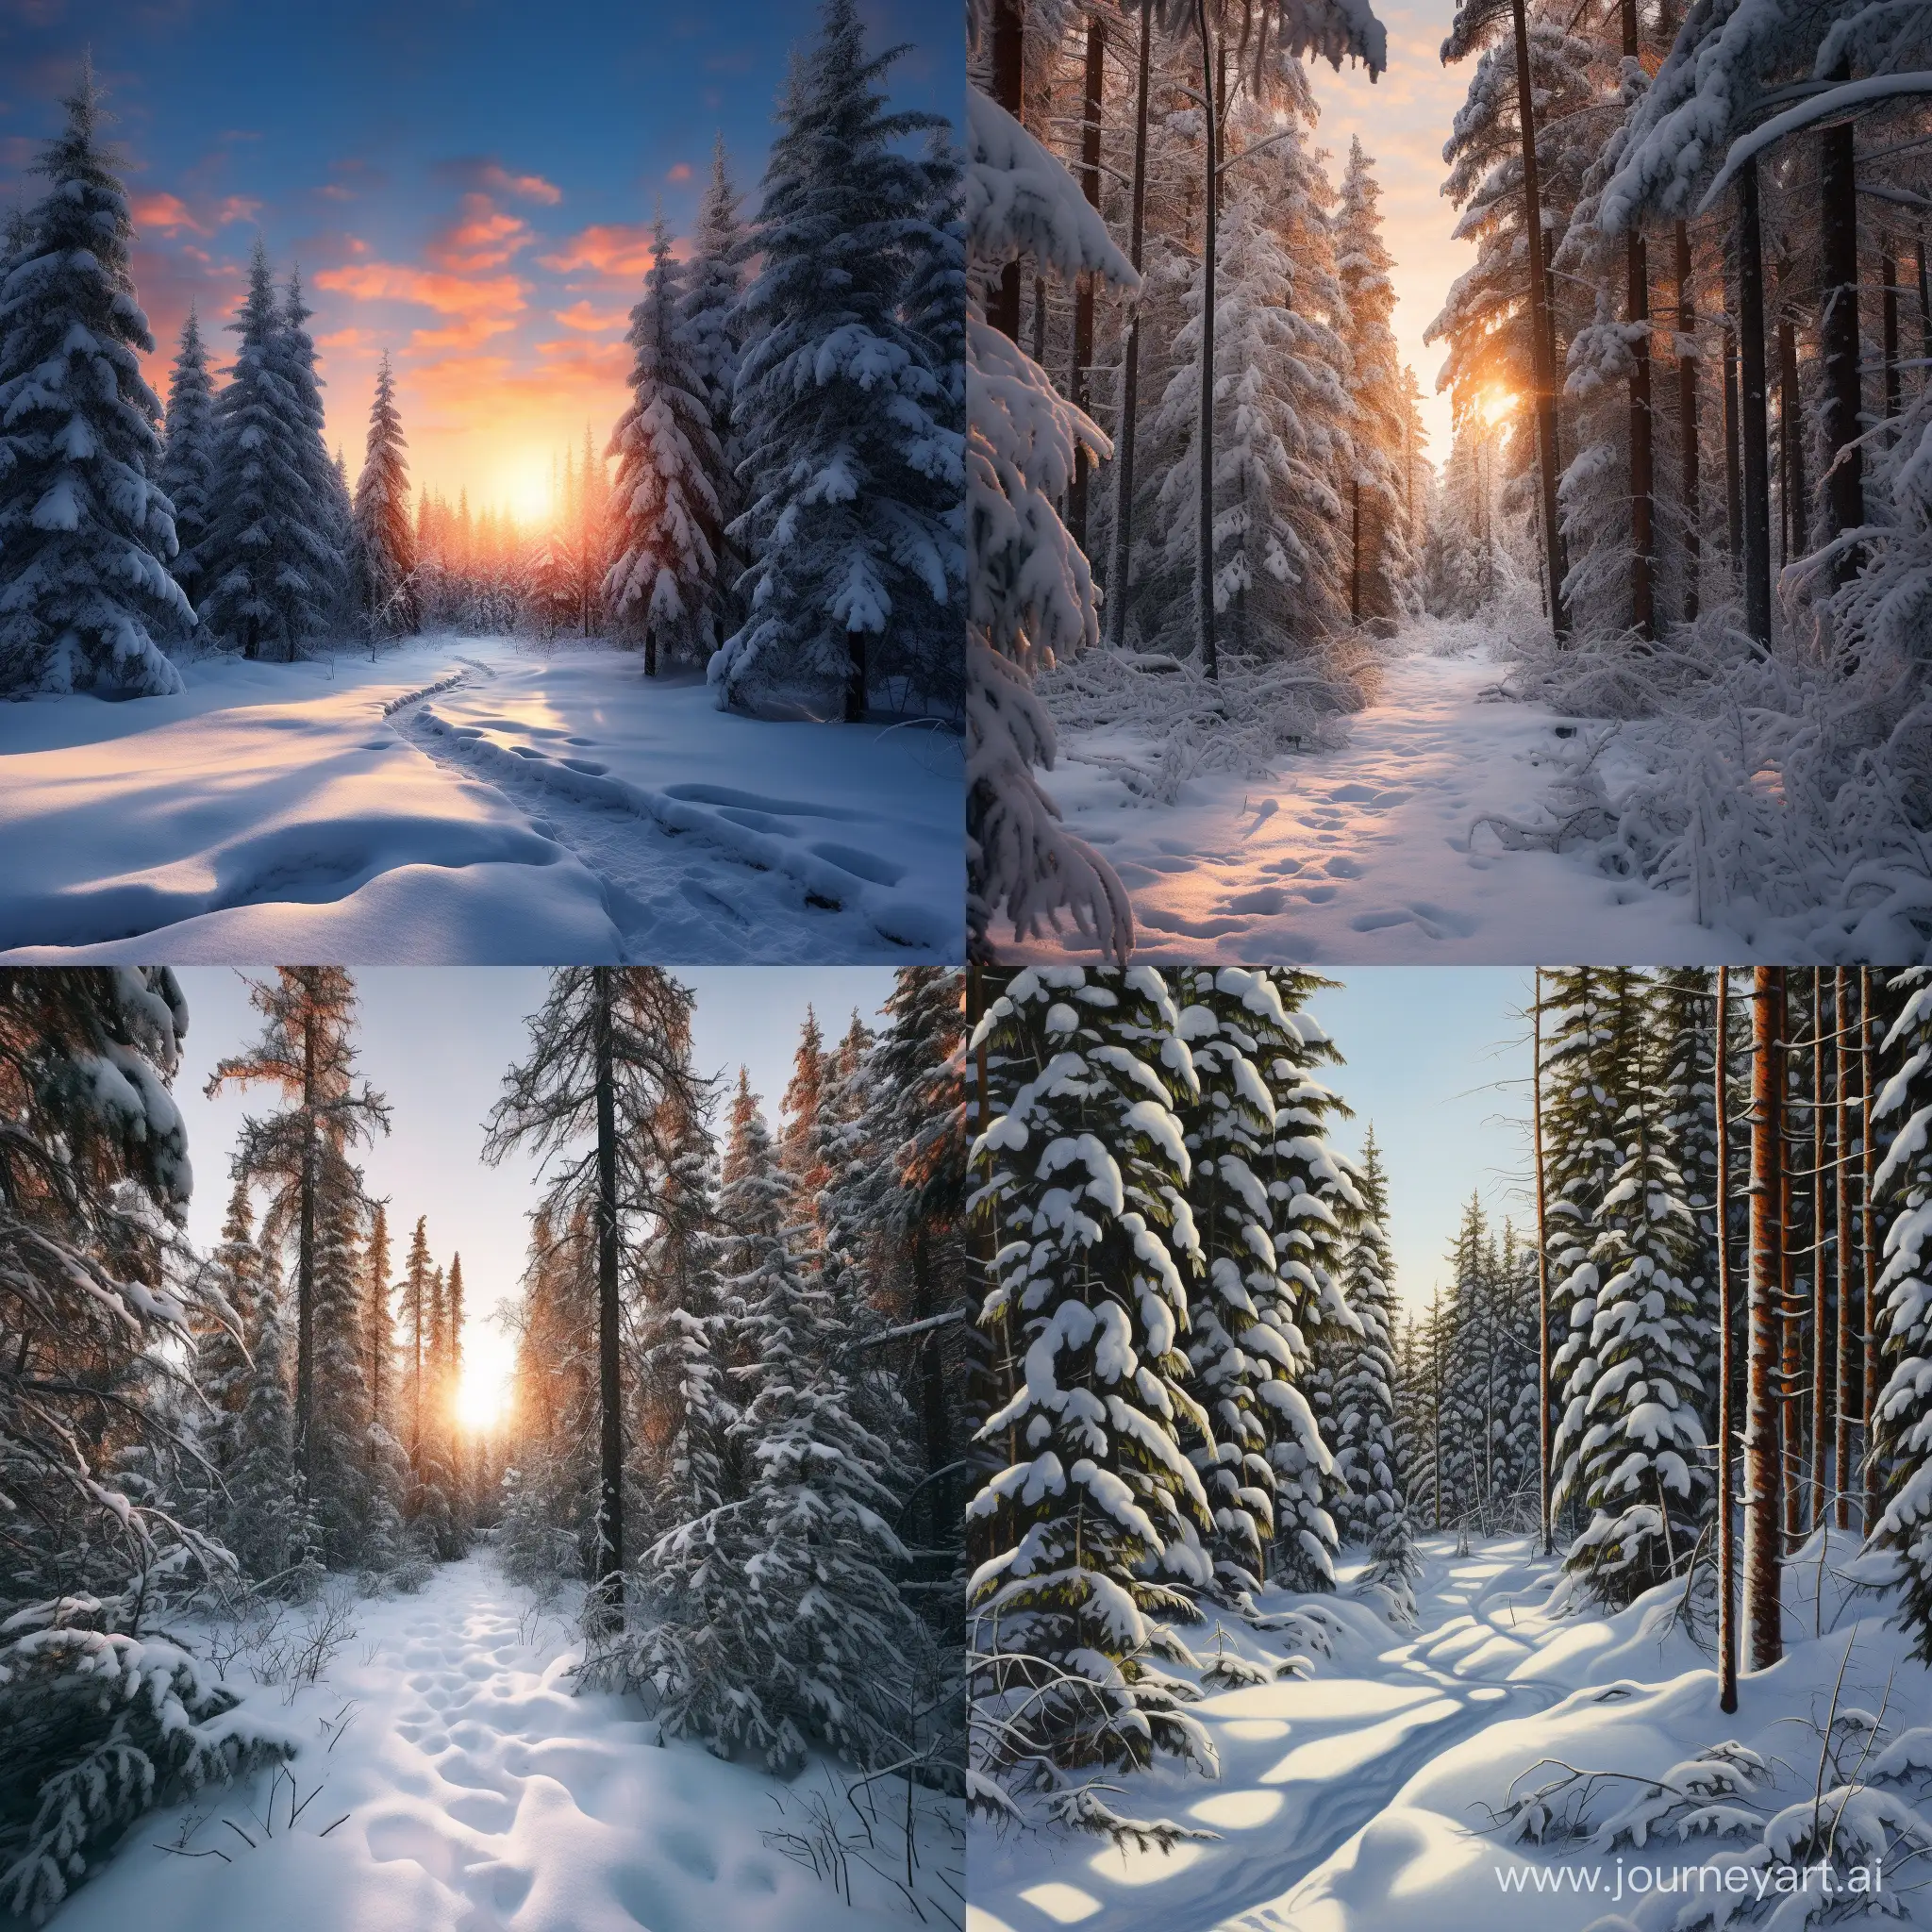 Enchanting-Snowcovered-Winter-Forest-with-Spruces-Firs-Pines-and-Cedars-under-Soft-Lighting